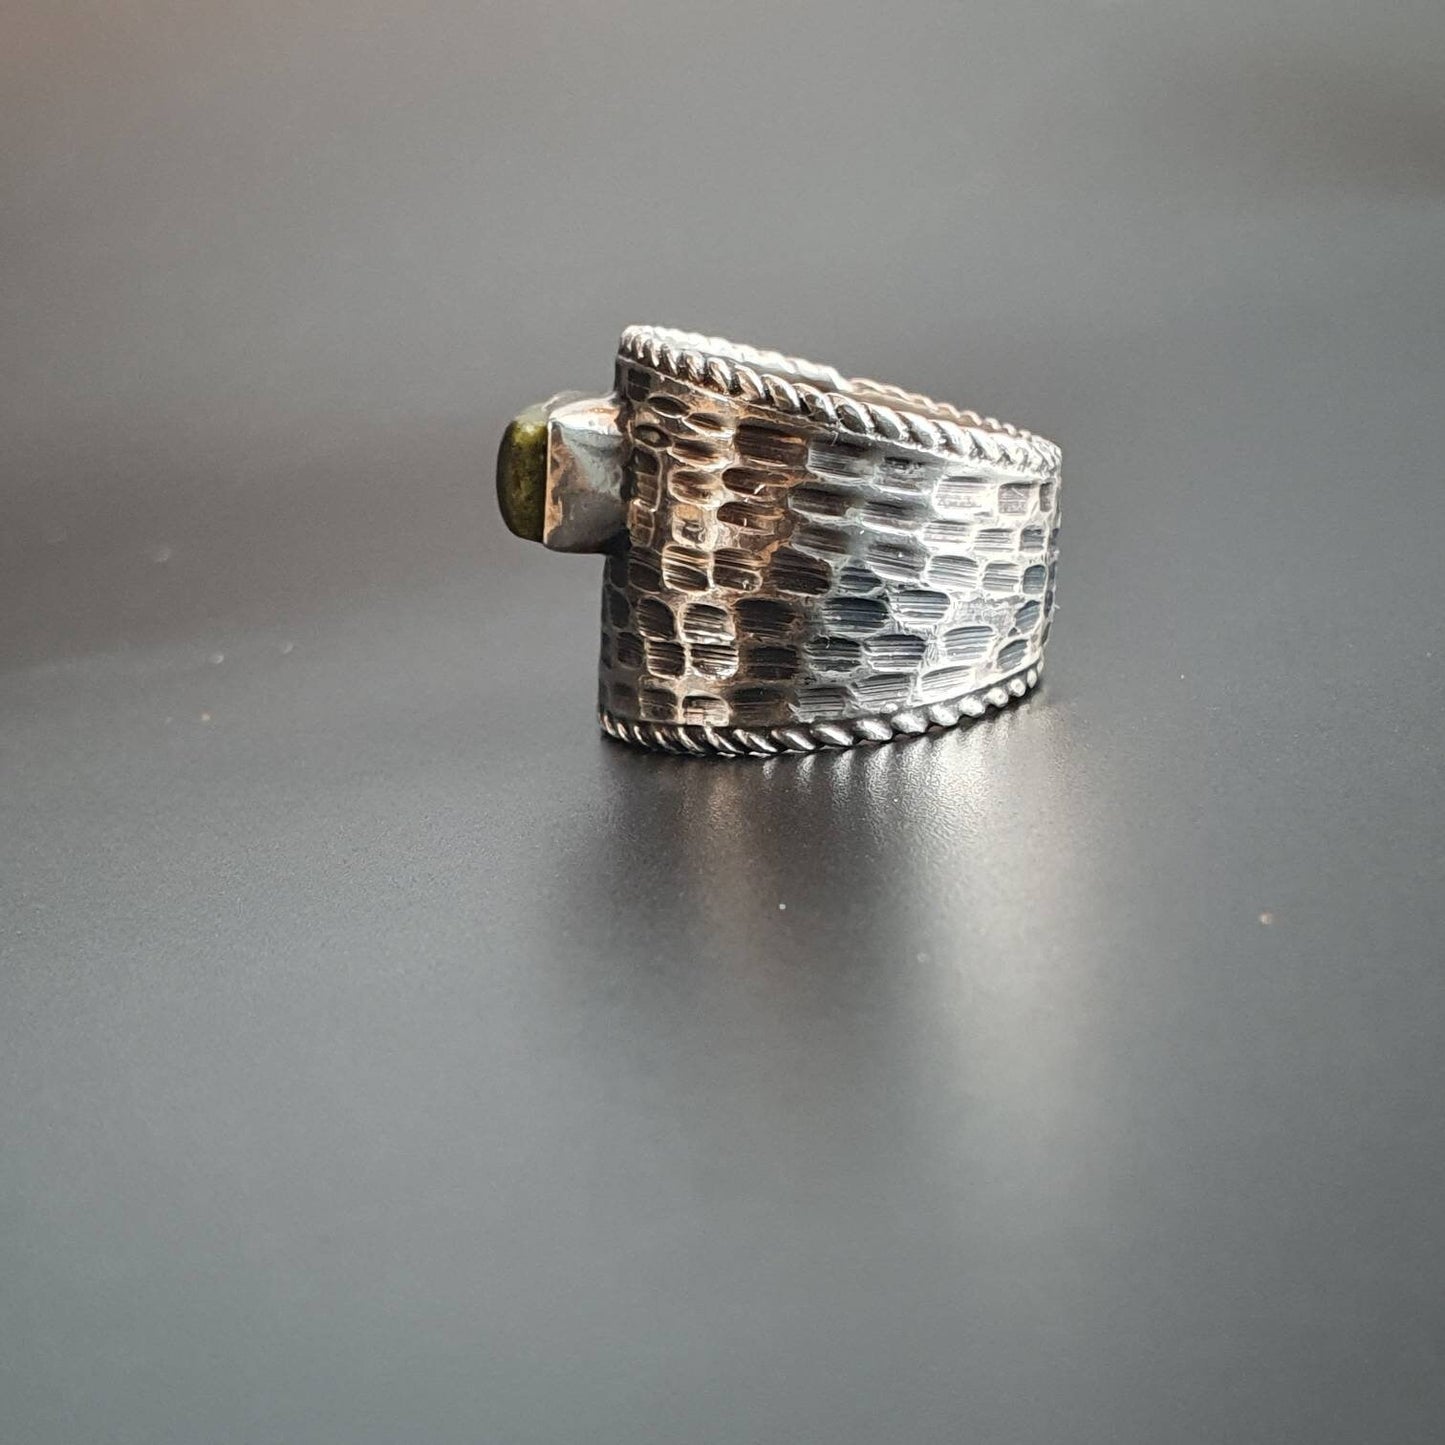 Ring, sterling silver ring, statement ring, handmade, vintage, jewellery, gift's, occasions, gothic, witchy, antique, hammered texture